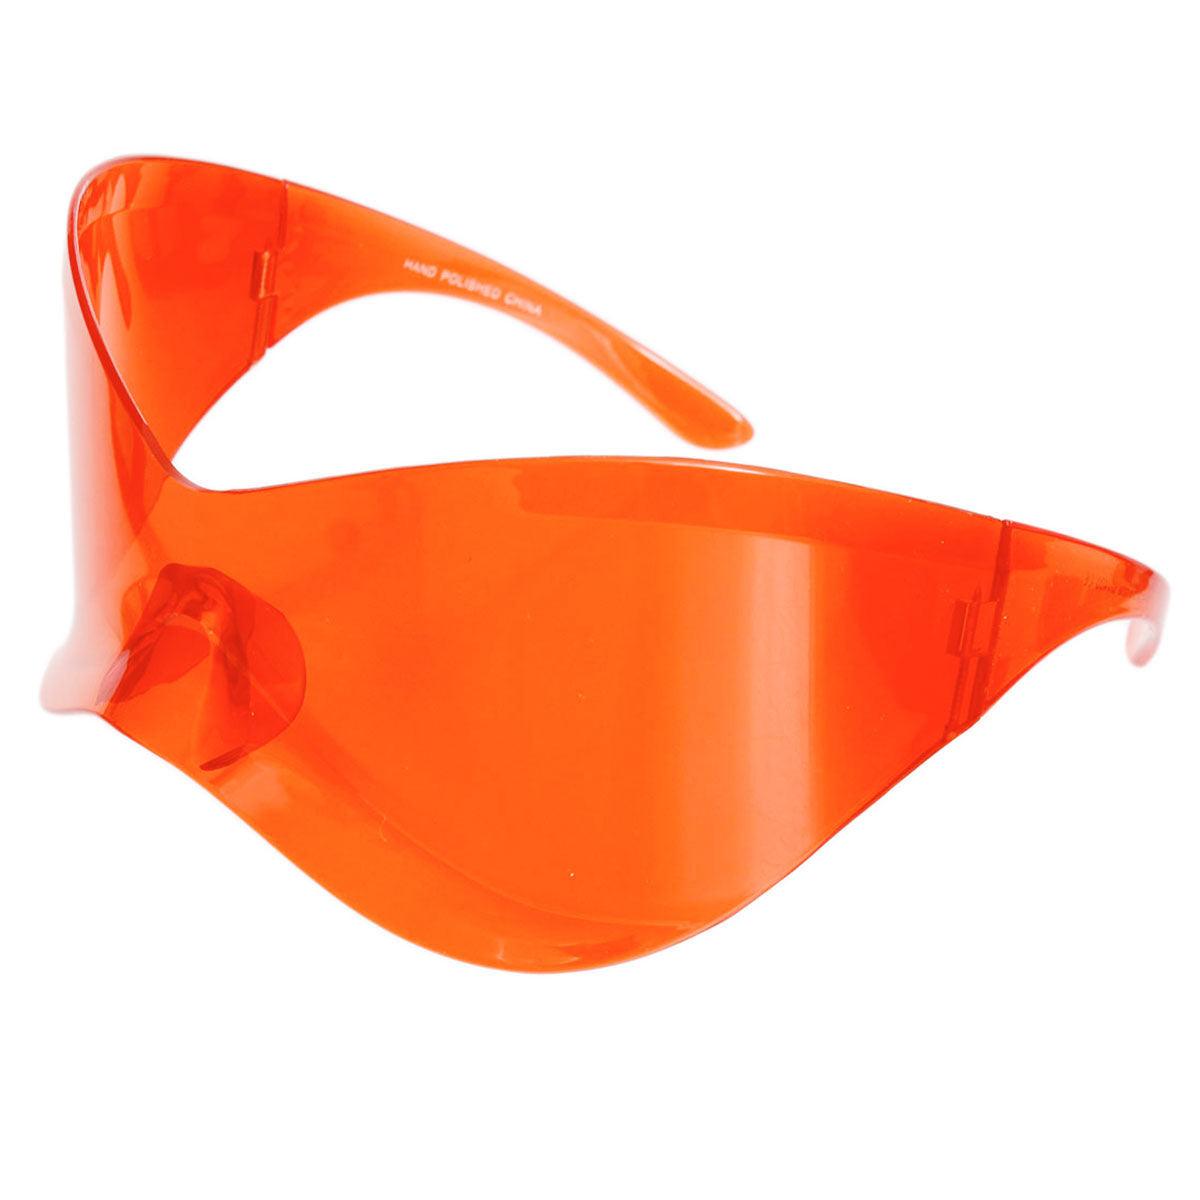 Shop Women's Red Oversized Shield Visor Sunglasses for a Bold Look